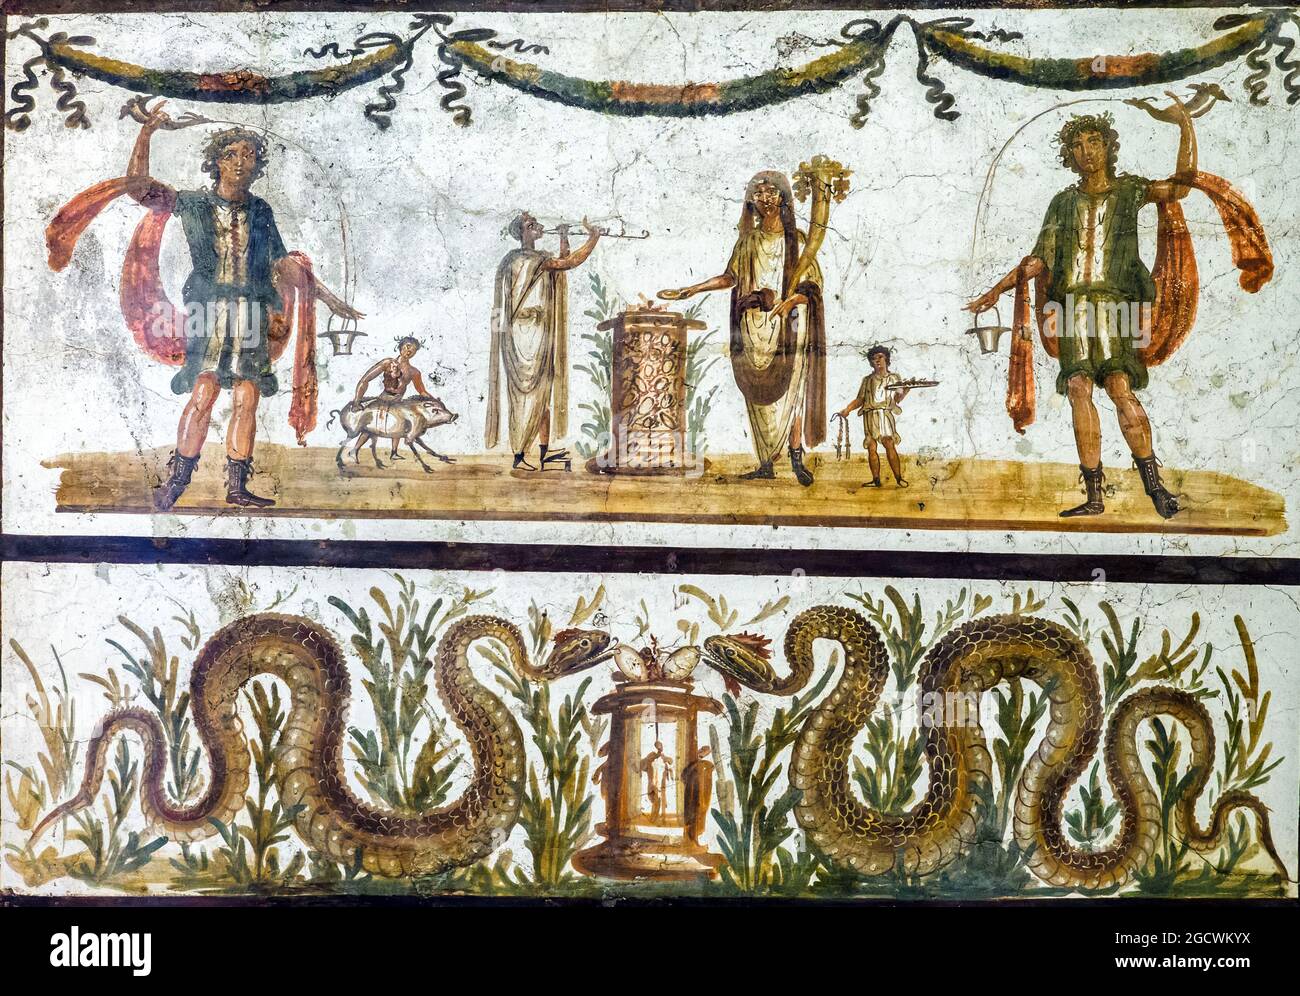 Sacrifice scene depicted in the Roman fresco from Pompeii, now on display  in the National Archaeological Museum (Museo Archeologico Nazionale di  Napoli) in Naples, Campania, Italy. Two lares, in their characteristic  clothing